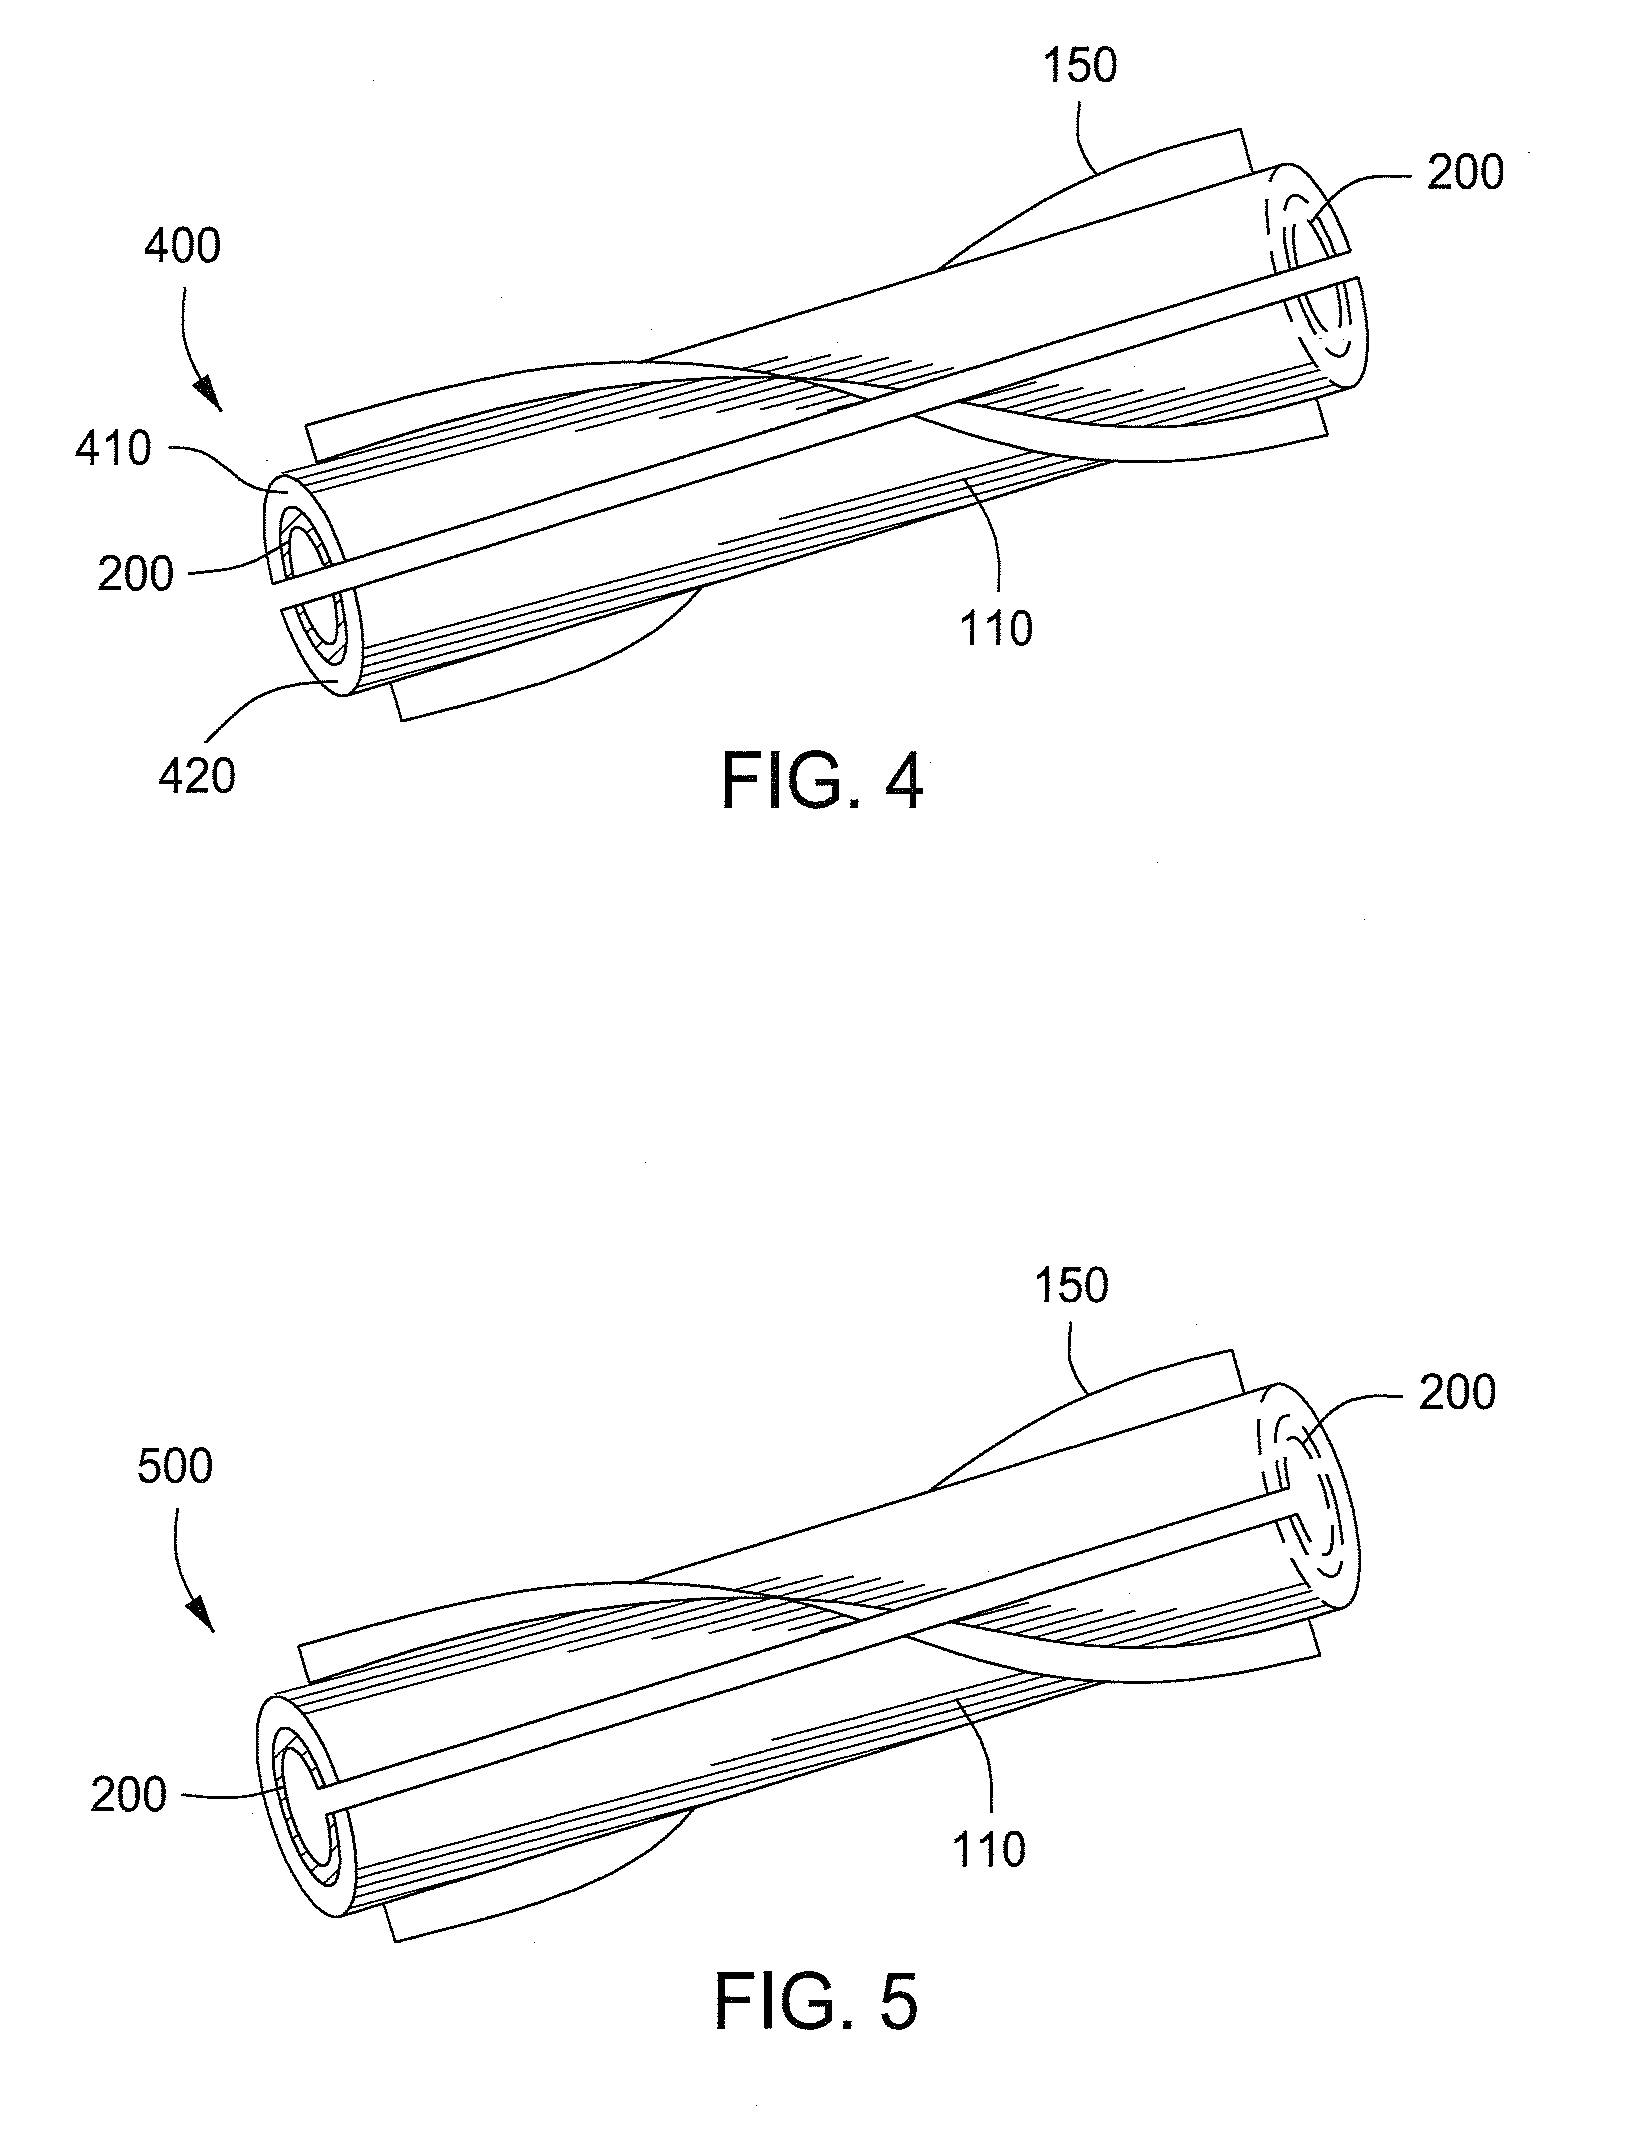 Apparatus and method for inhibiting vortex-induced vibration